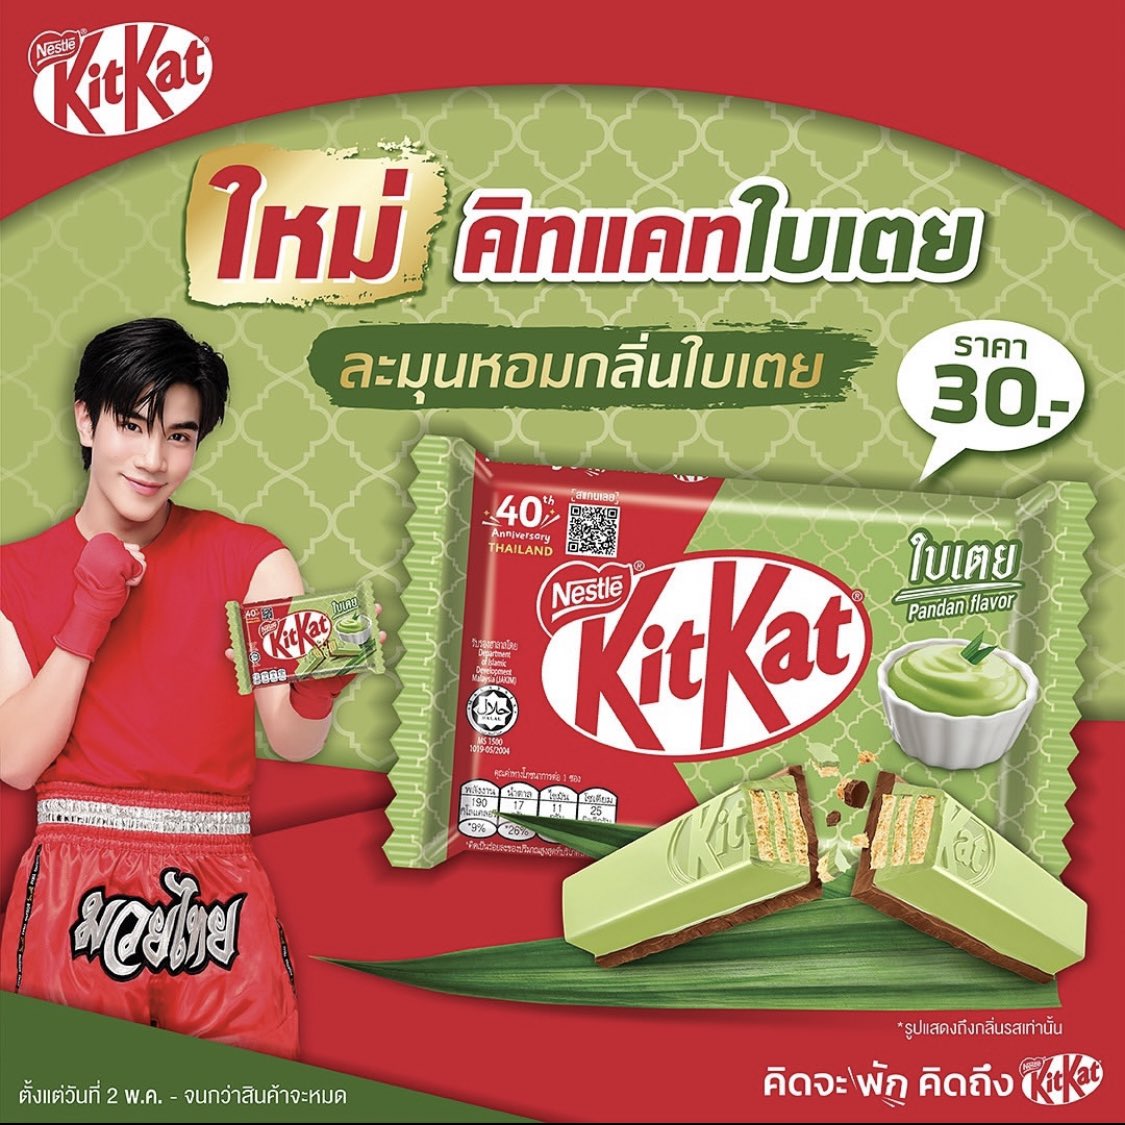 Oh Muay Thai Fourth🙉 with new flavor of Kitkat💚 are we getting new pics for every new flavors🤭

#KITKATTHAILAND #KitkatxFourth 
#Fourthnattawat #โฟร์ทณัฐวรรธน์